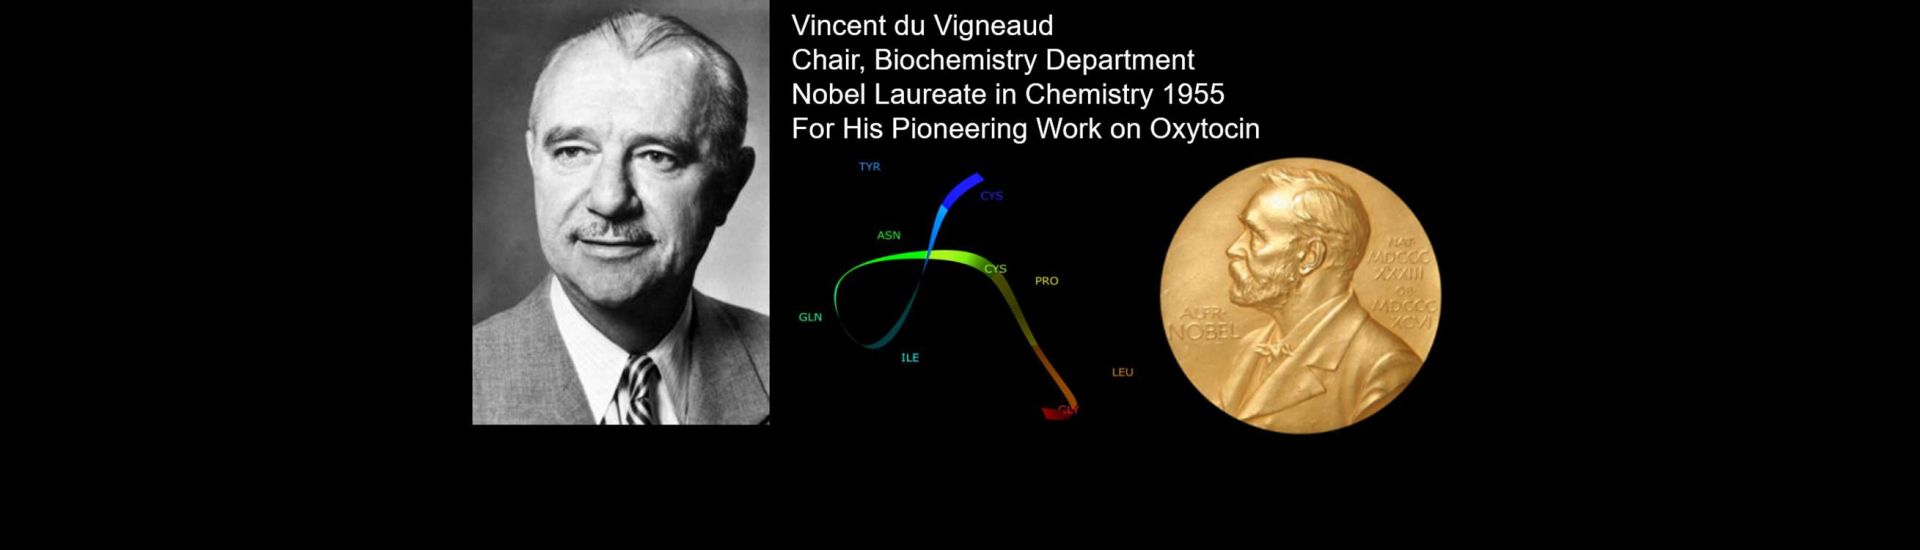 "exploring research is the working of a winding trail into the unknown" Vincent du Vigneaud, Nobel Laureate in Chemistry 1995 for his pioneering work on oxytocin, chair of the gw biochemistry dept.